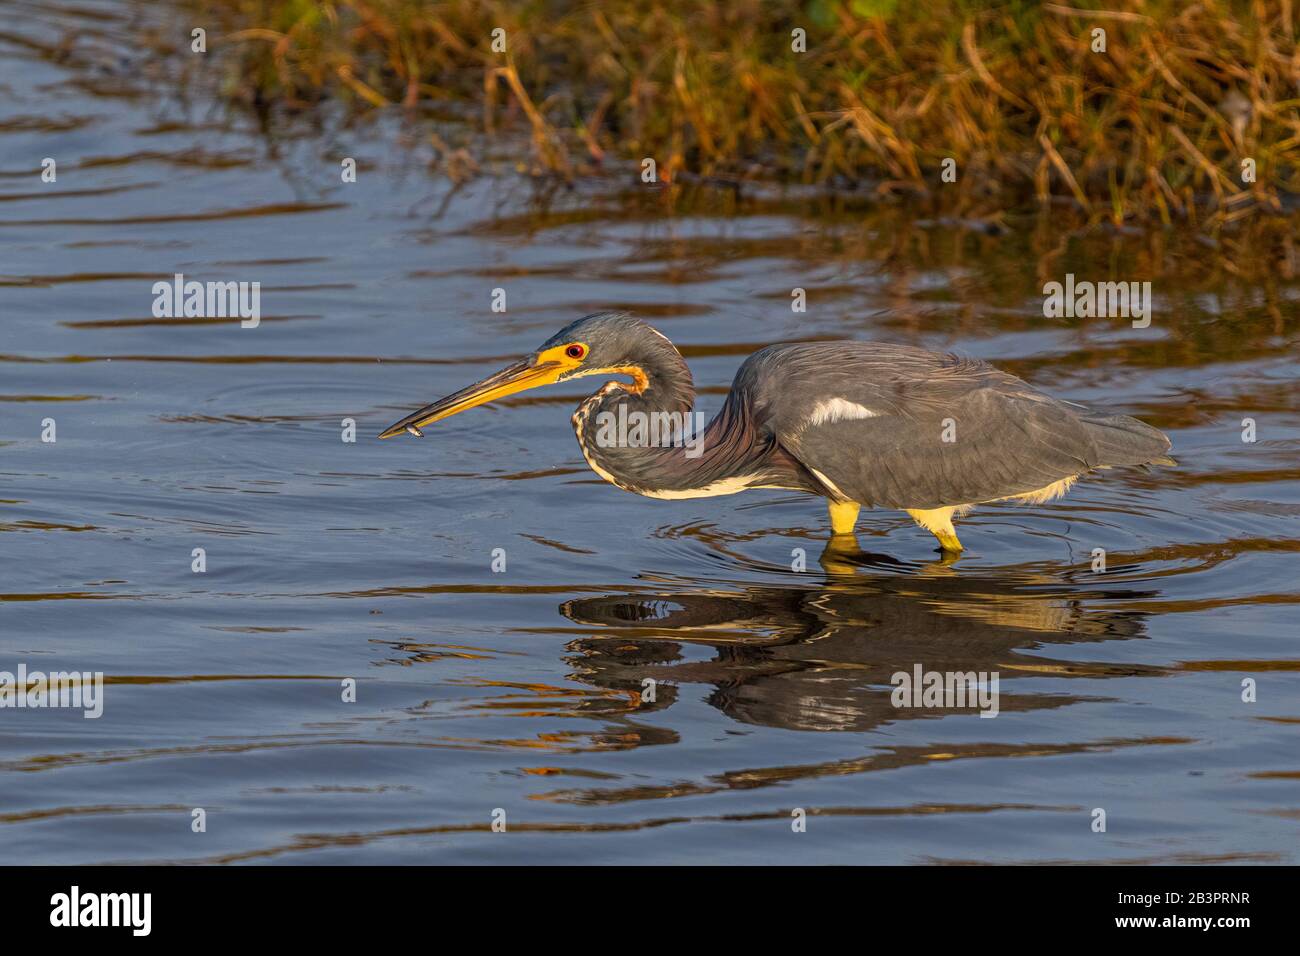 A Tricolored Heron (Egretta tricolor) wading, holding a small fish in its beak in the waters of Merritt Island National Wildlife Refuge, Florida, USA. Stock Photo